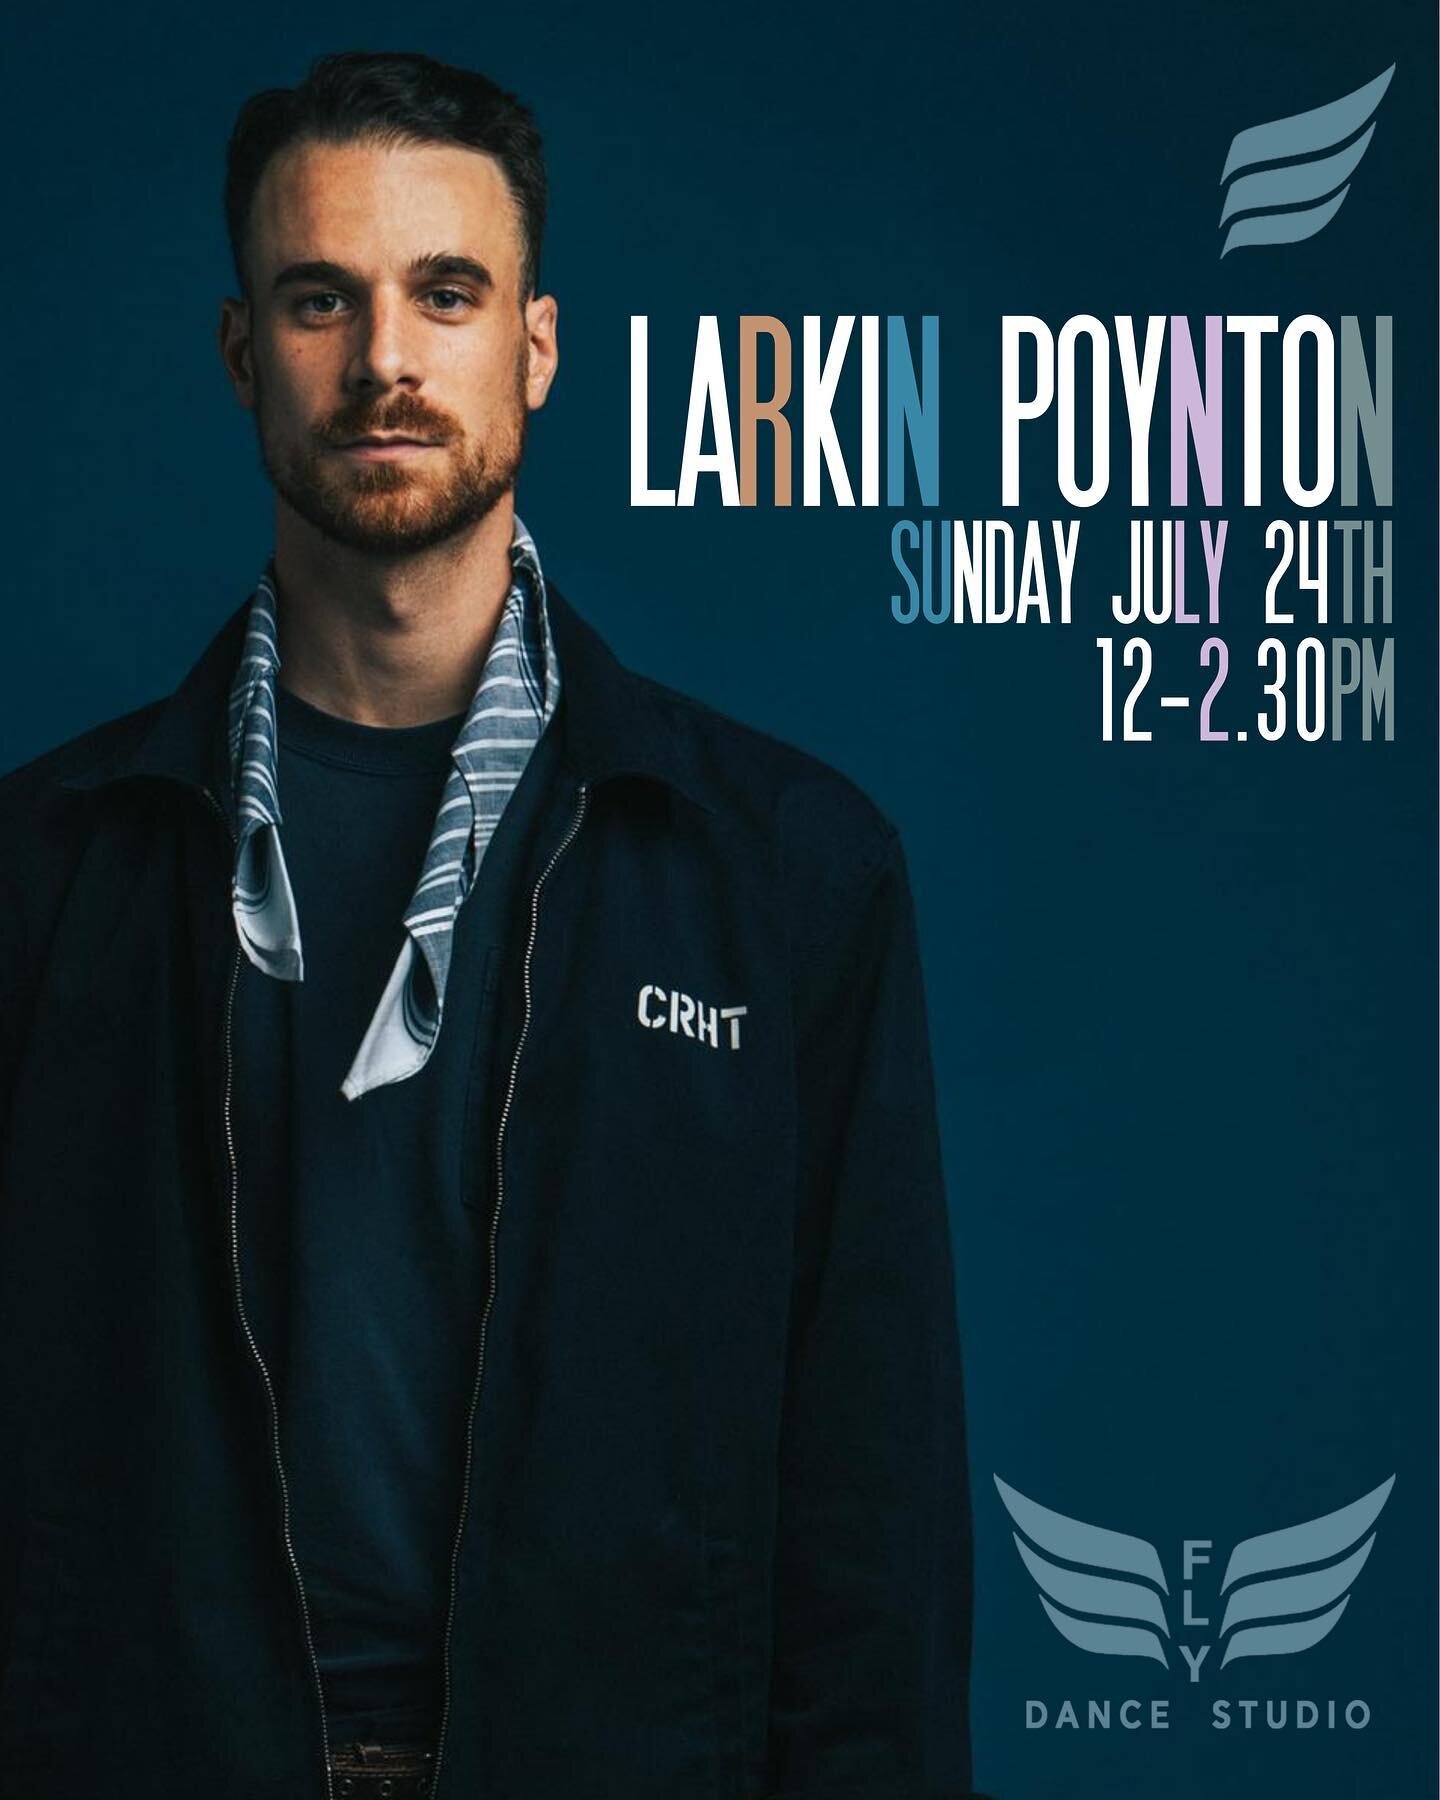 ❗️SUNDAY 24TH JULY❗️
@larkinpoynton WILL BE TEACHING HERE AT FLY DANCE STUDIO!!!
➡️SUNDAY 24TH JULY
➡️12-2:30PM
➡️ONE DAY ONLY, DON&rsquo;T MISS OUT🔥
➡️BOOK IN NOW ON THE FLY DANCE STUDIO APP📲